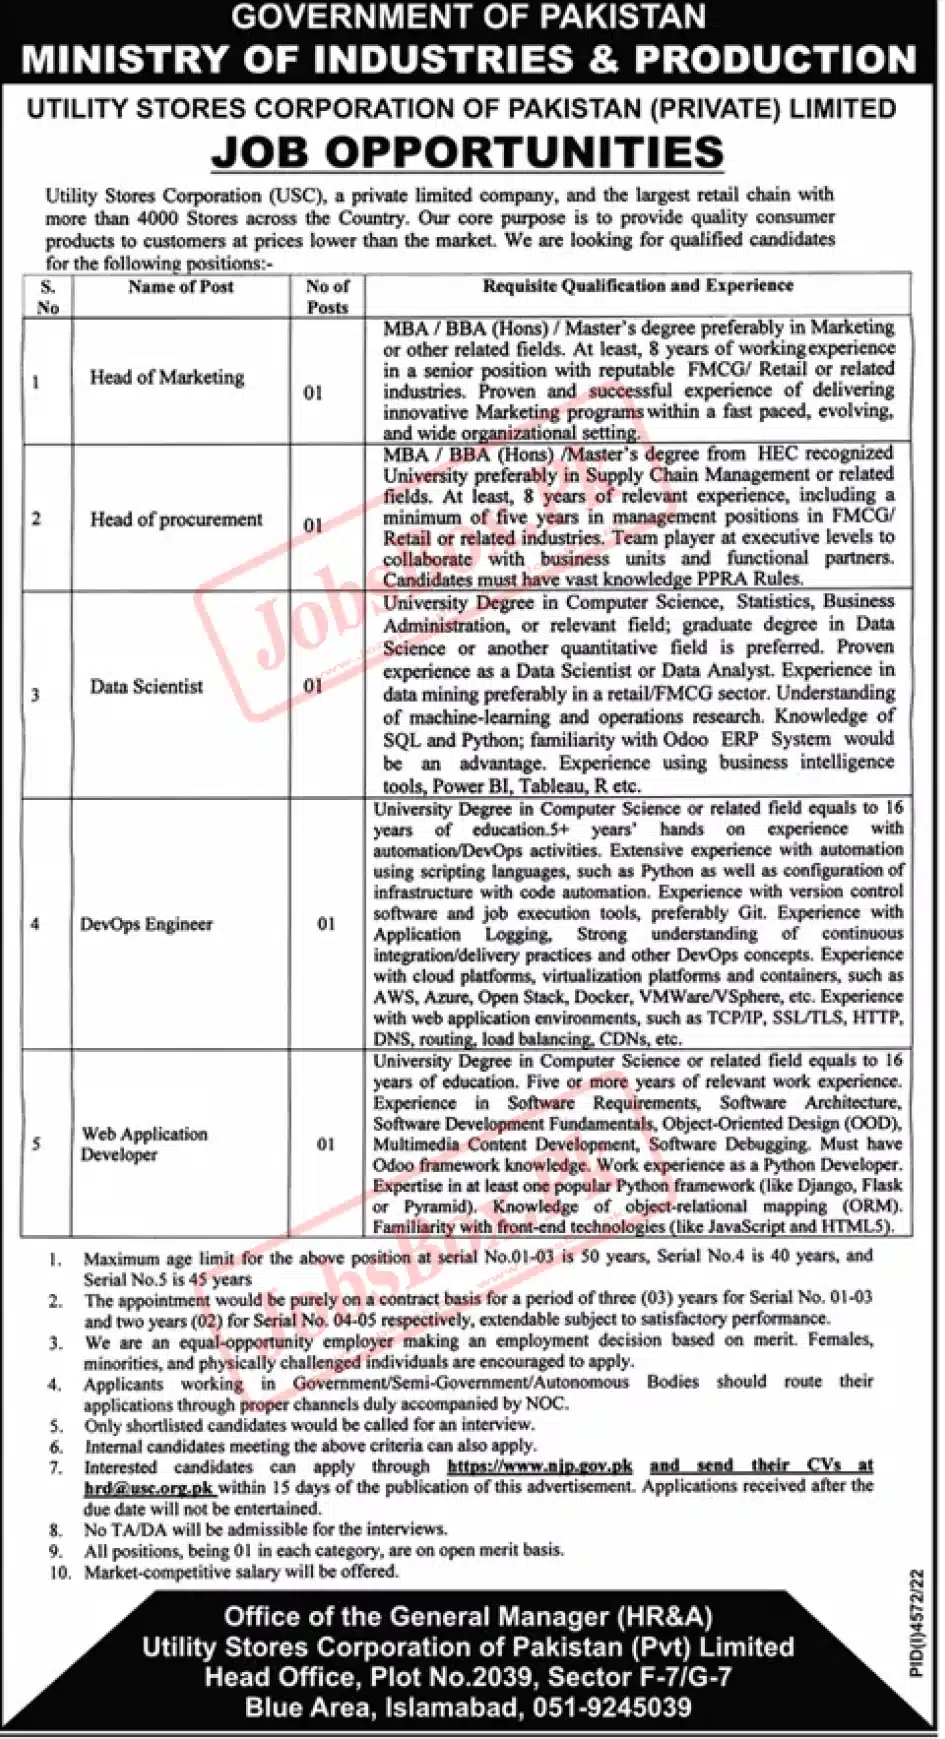 Industries and Production Ministry of Pakistan Jobs 2023